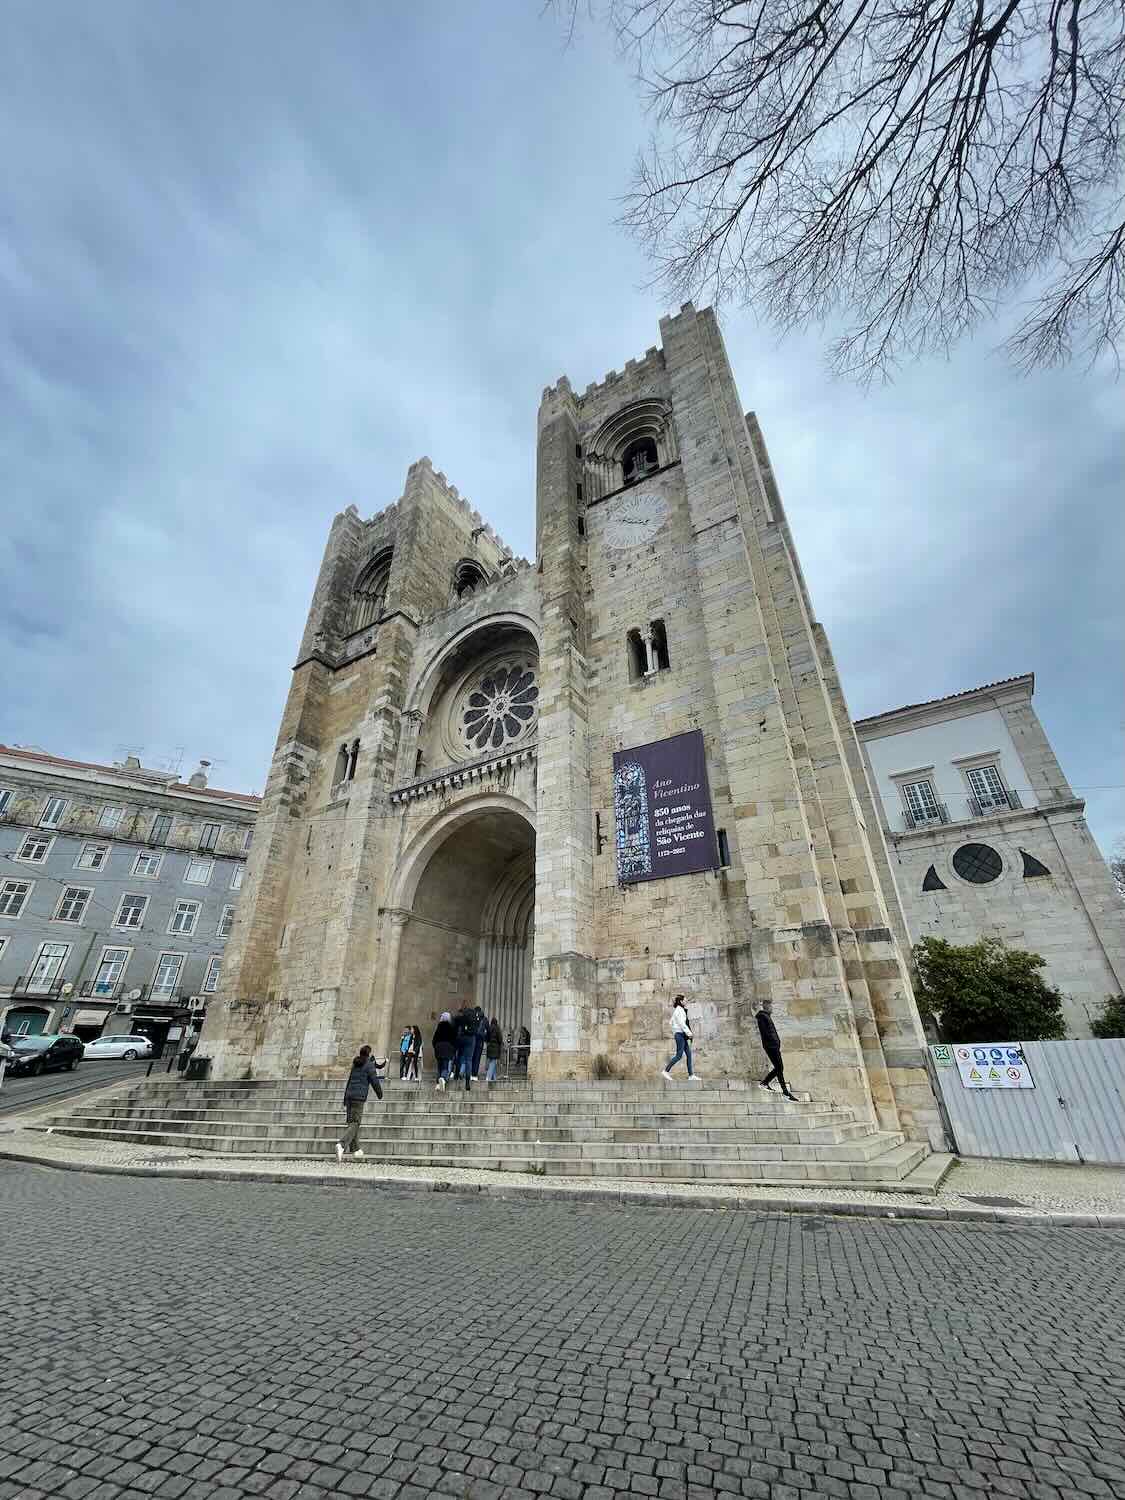 Visitors ascend the steps to the Lisbon Cathedral, a mix of Romanesque and Gothic architecture, reflecting the city's deep historical and religious heritage